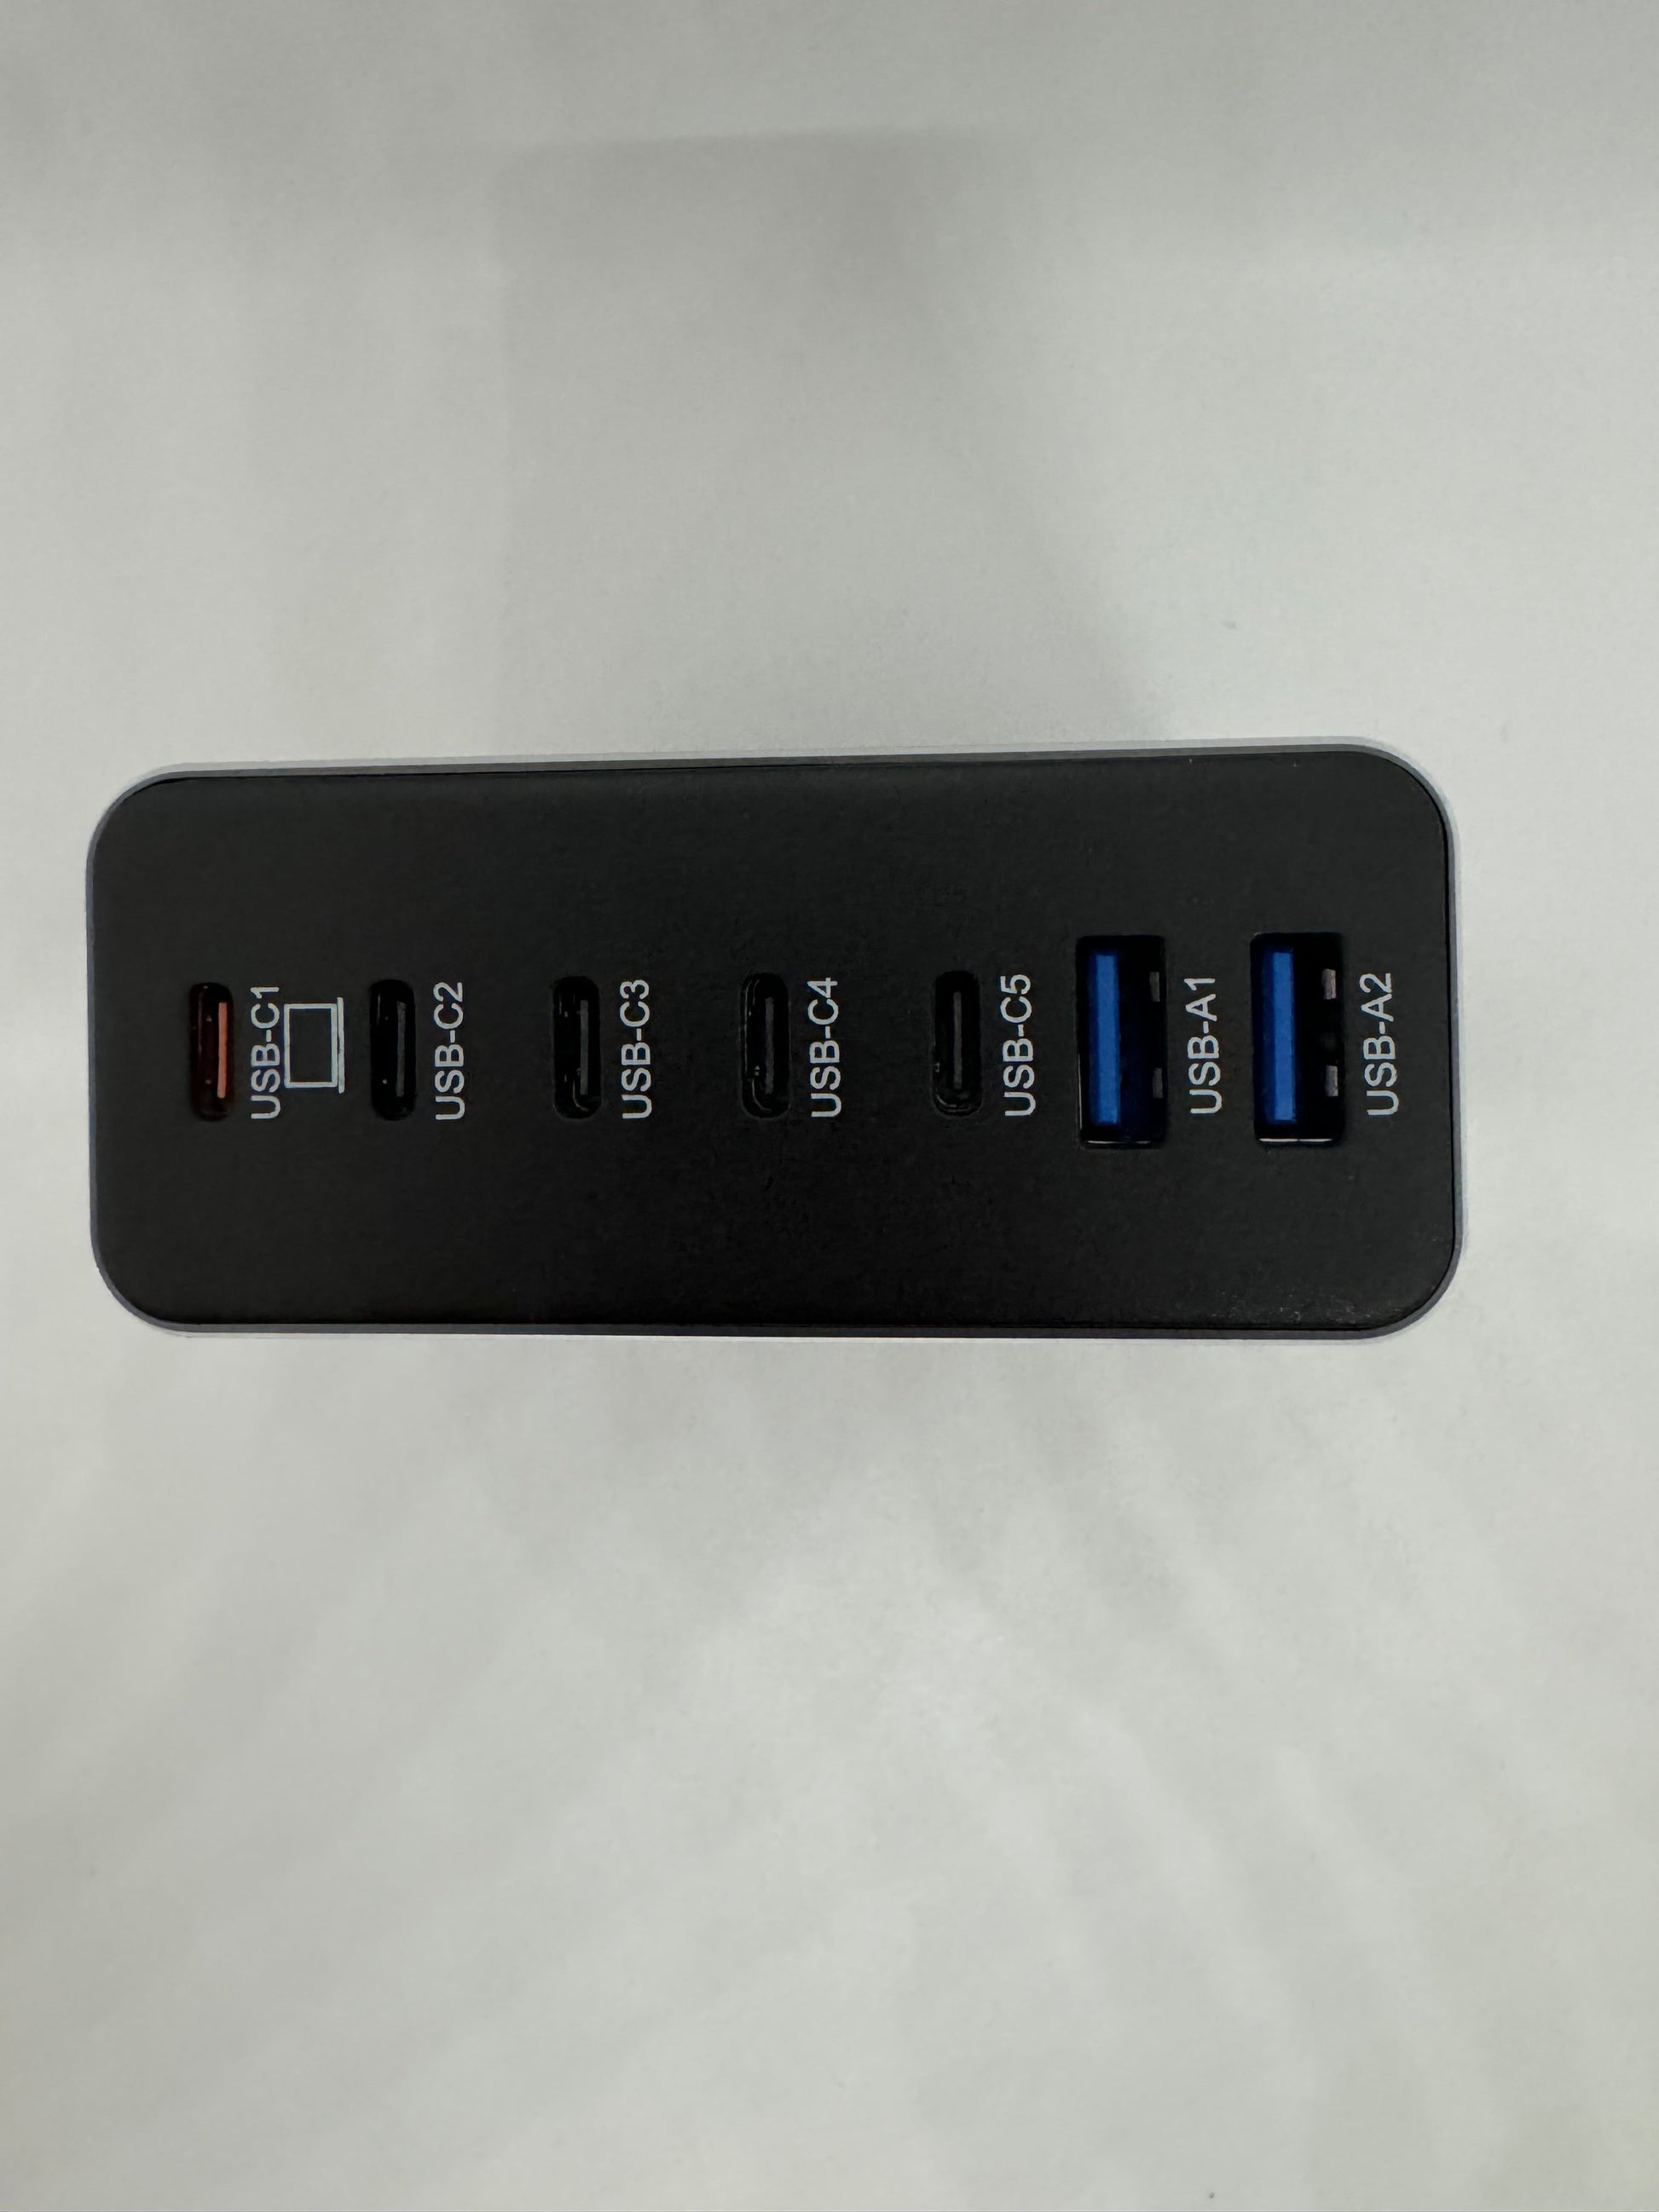 The picture shows a black USB hub with multiple ports. The hub is placed at the bottom of the image against a white background. There are seven ports in total. From left to right, they are labeled as follows:- USB-C 1- USB-C 2- USB-C 3- USB-C 4- USB 3.0 1- USB 3.0 2- USB 3.0 3The USB-C ports are smaller and have a rectangular shape with rounded corners. The USB 3.0 ports are larger and have a rectangular shape. The inside of the USB 3.0 ports is blue.